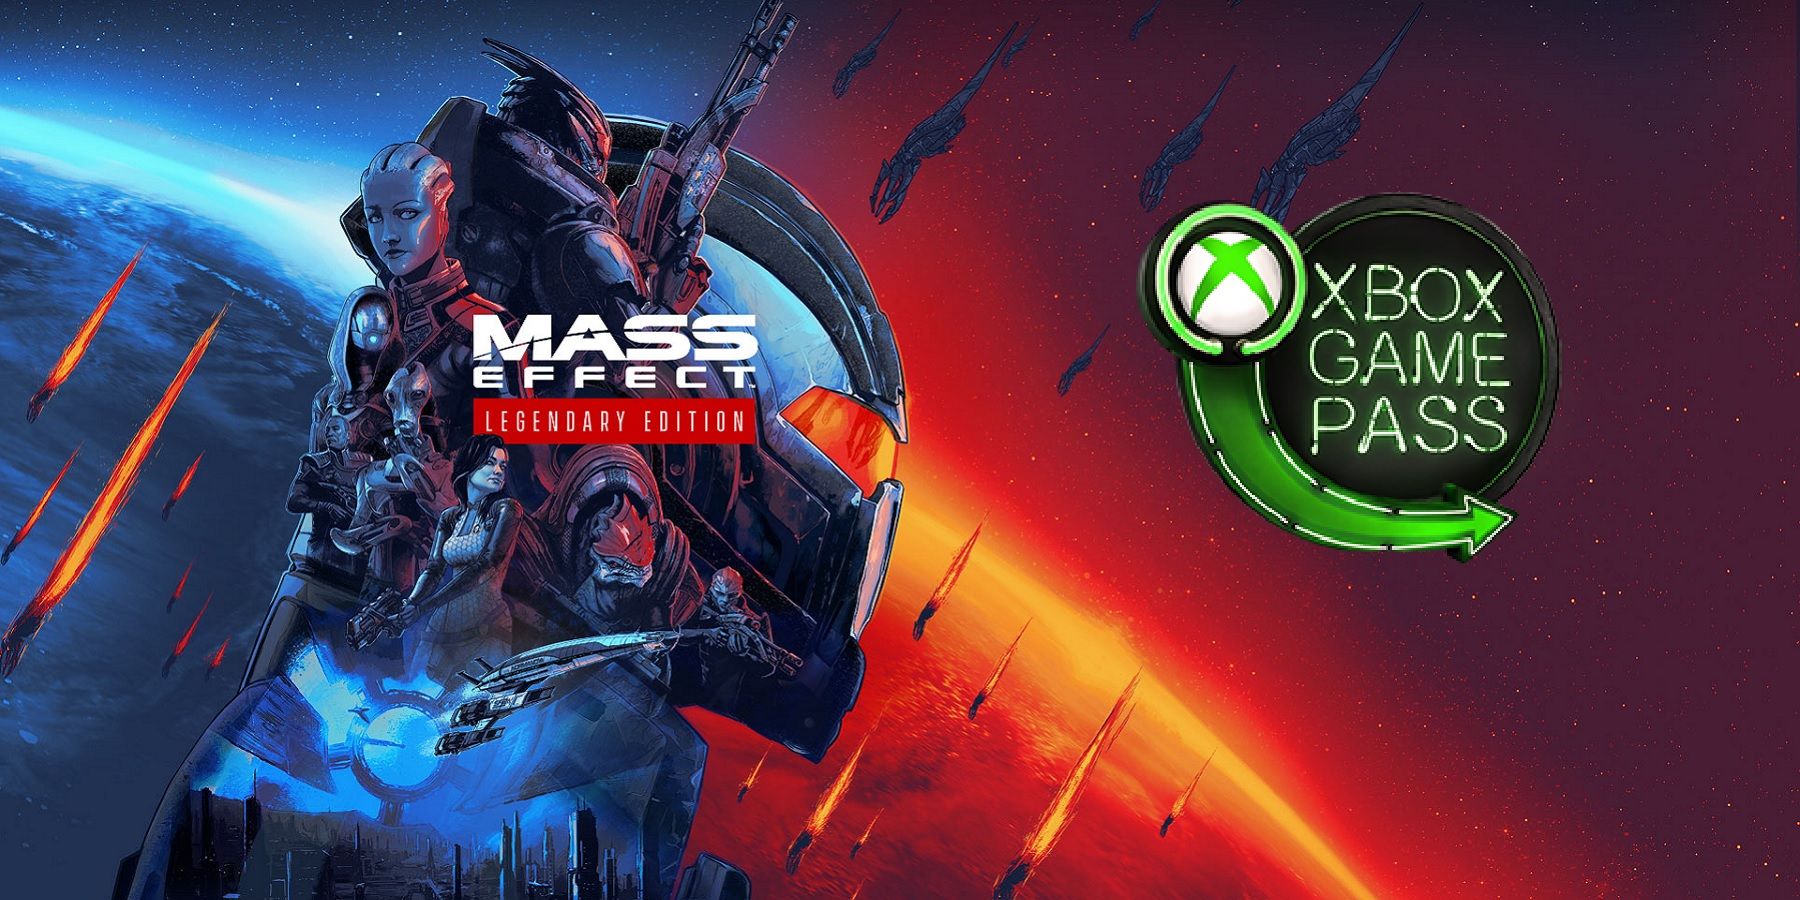 mass effect legendary edition with xbox game pass sign